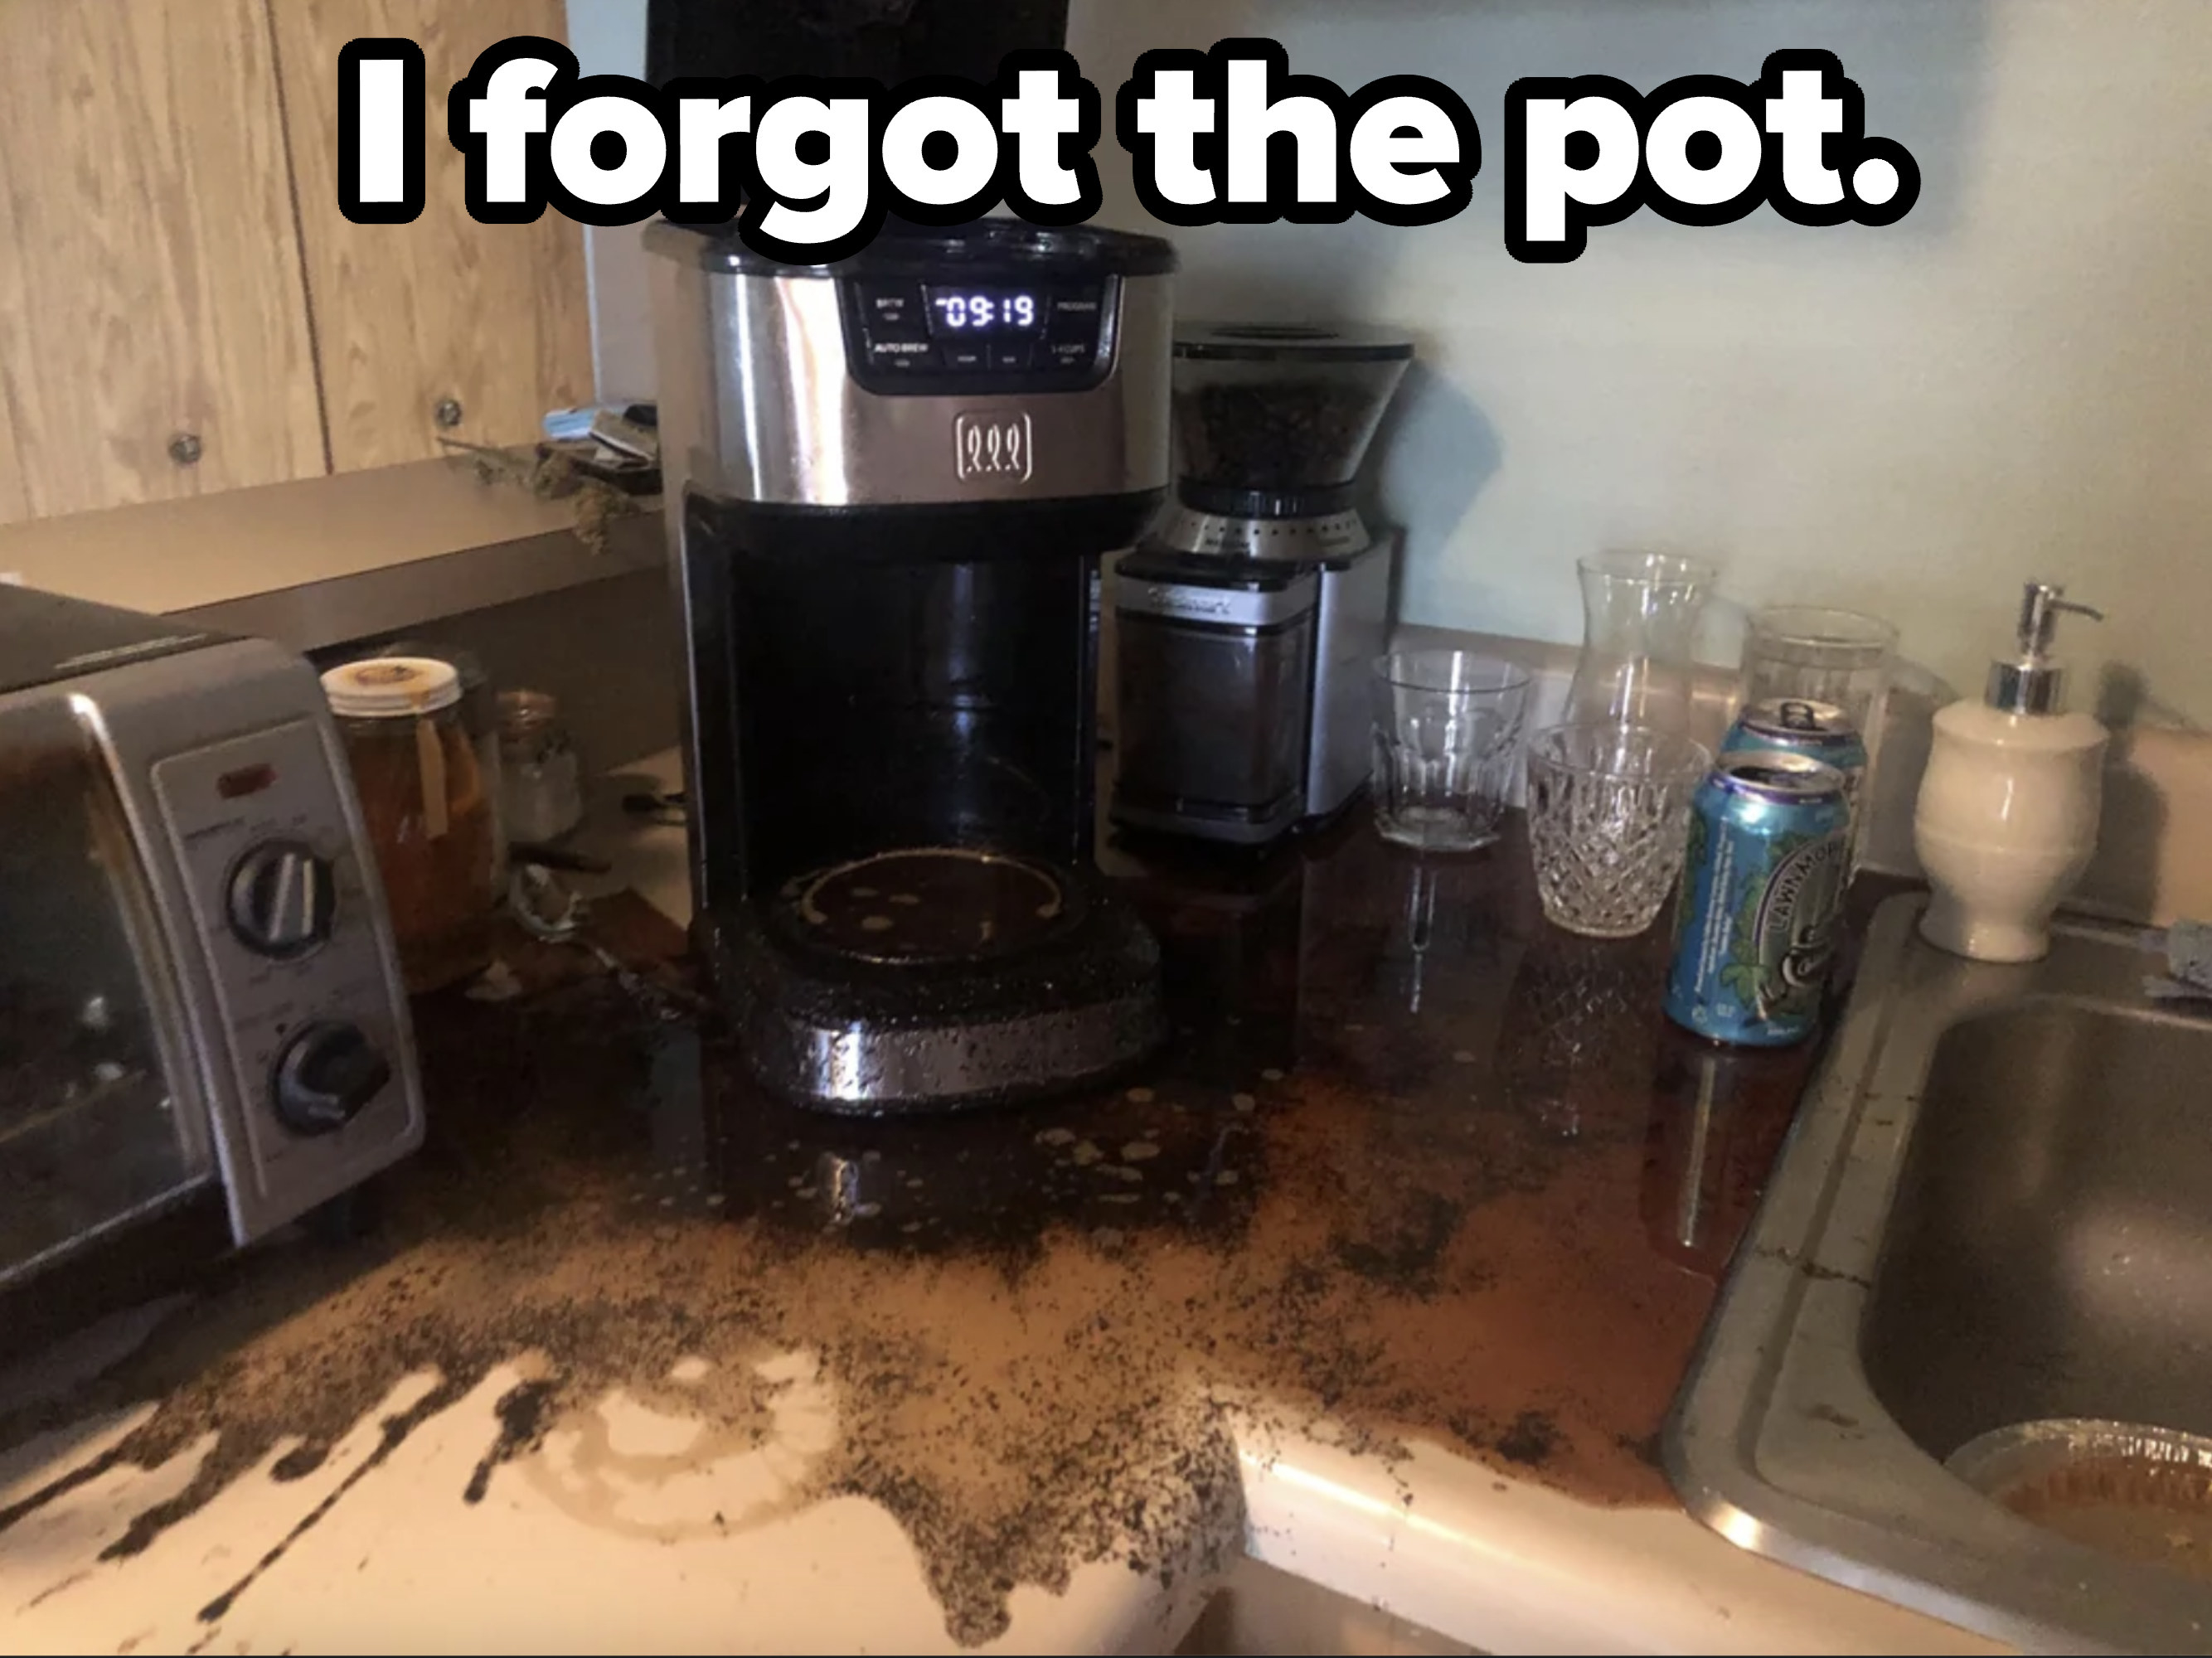 Coffee spilled all over a countertop